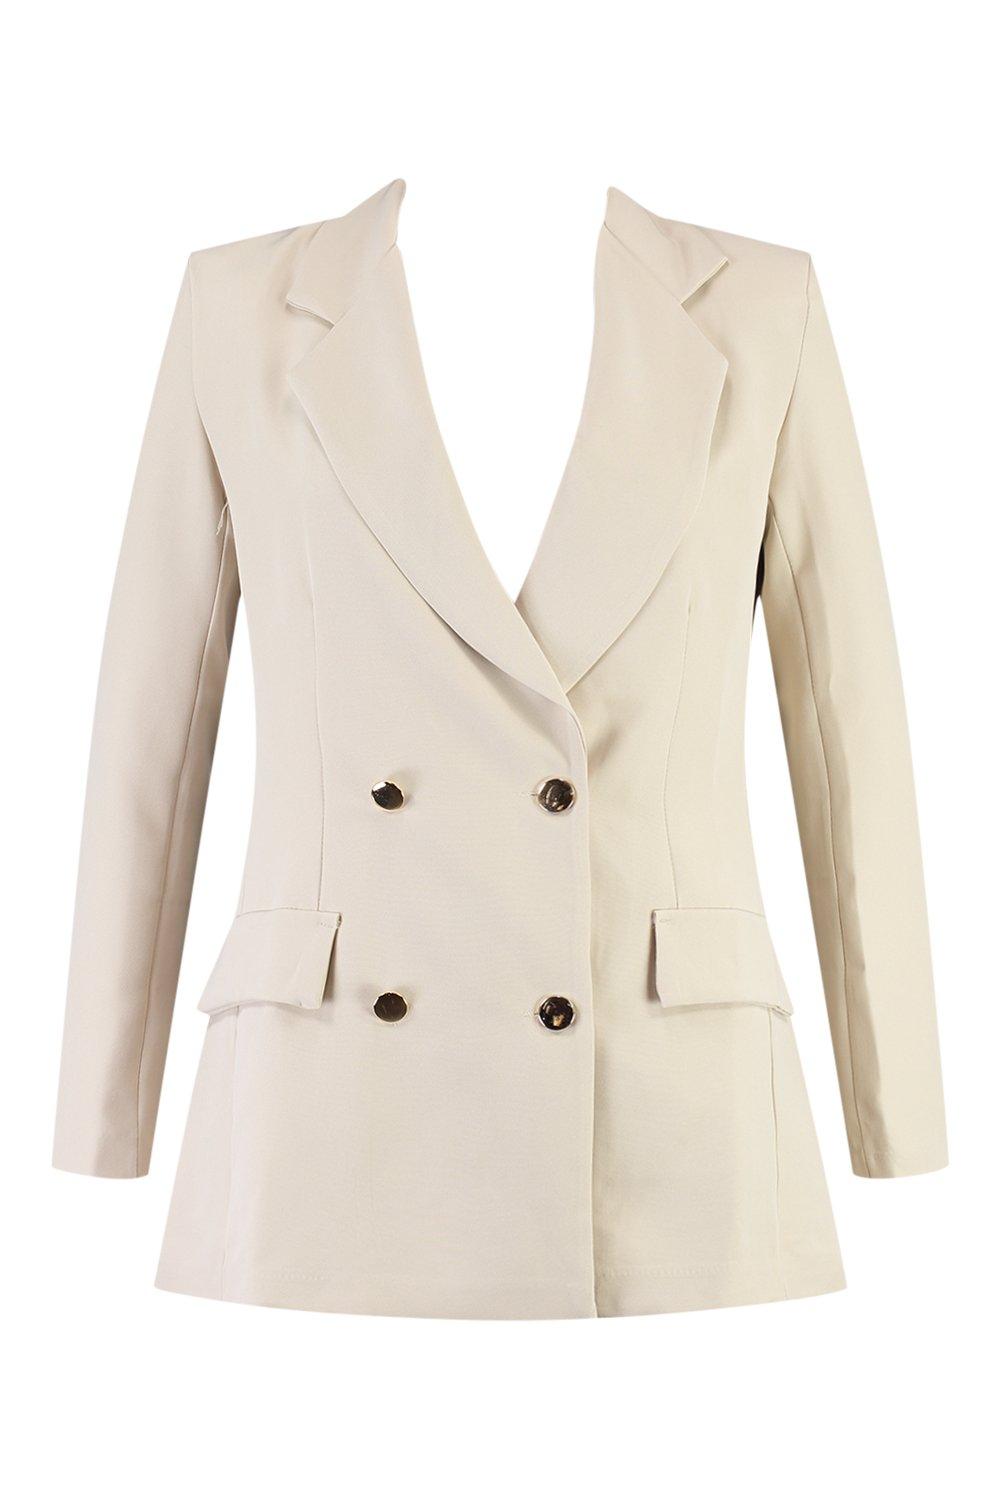 boohoo Double Breasted Military Blazer - Beige - Size 8